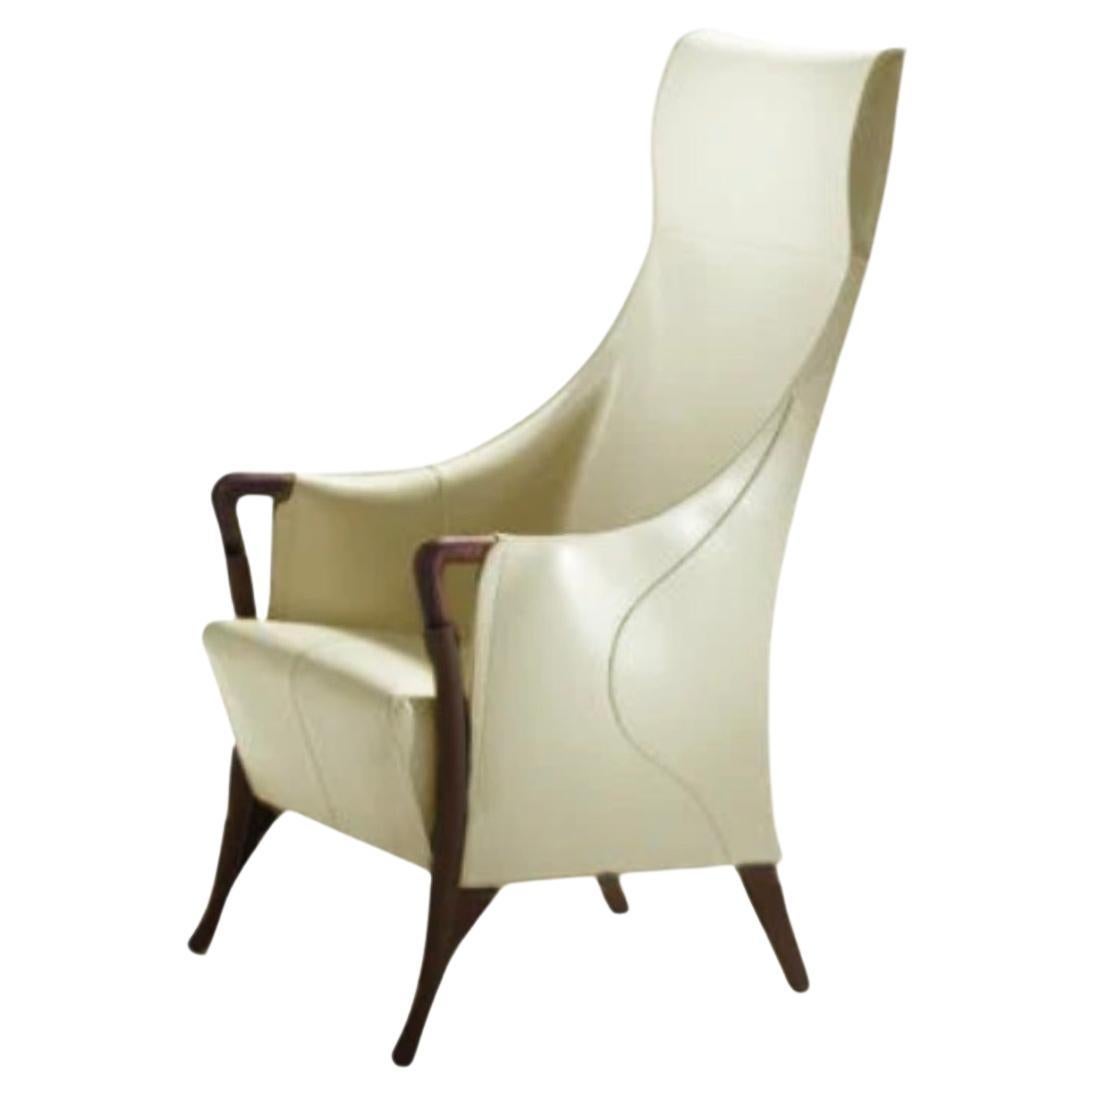 Giorgetti Progetti Highback Leather Armchair Designed by Centro Ricerche Set of  For Sale